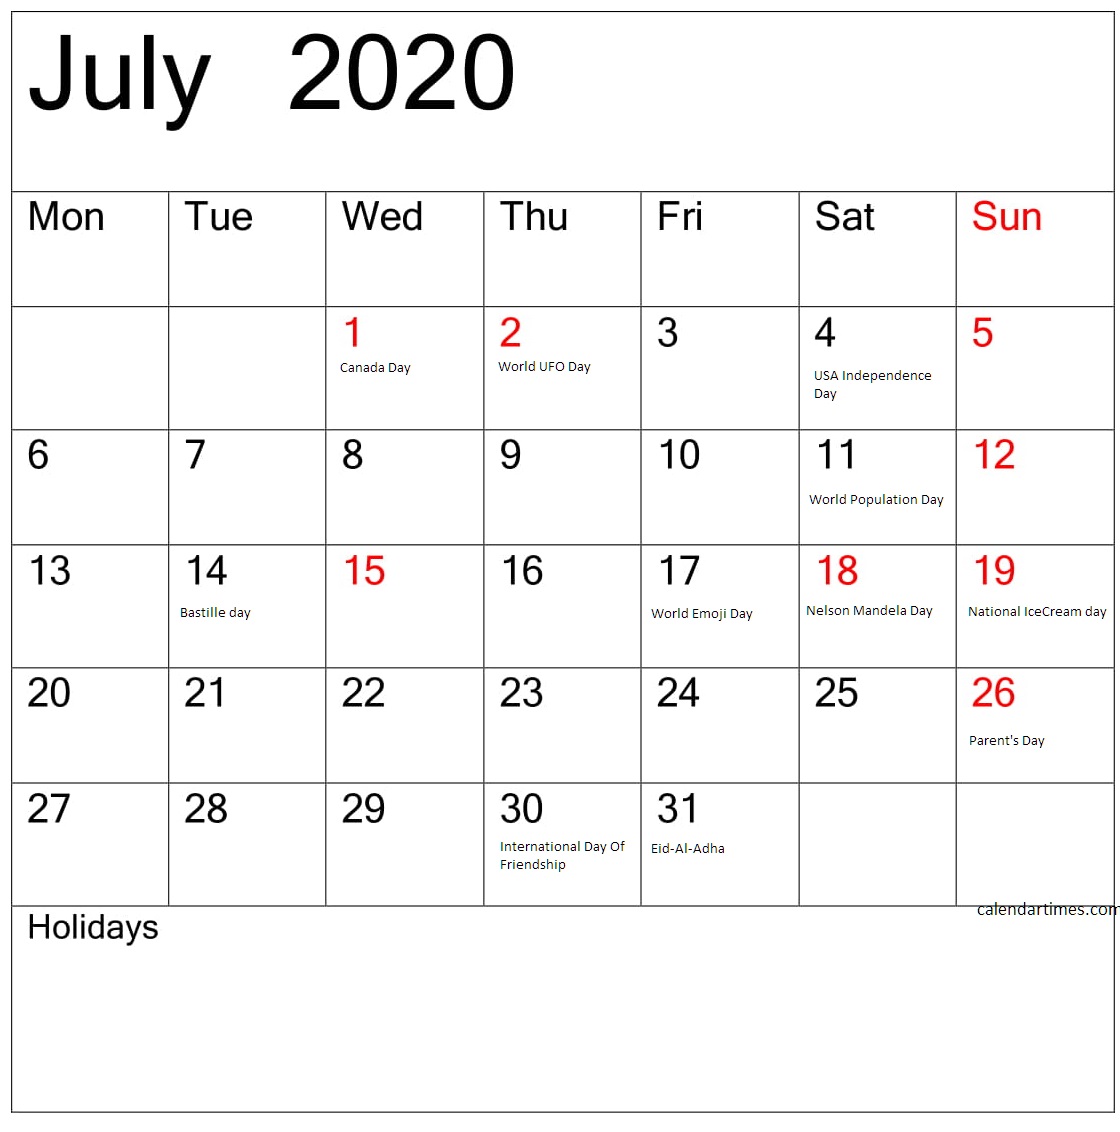 July Calendar 2020 With Holidays